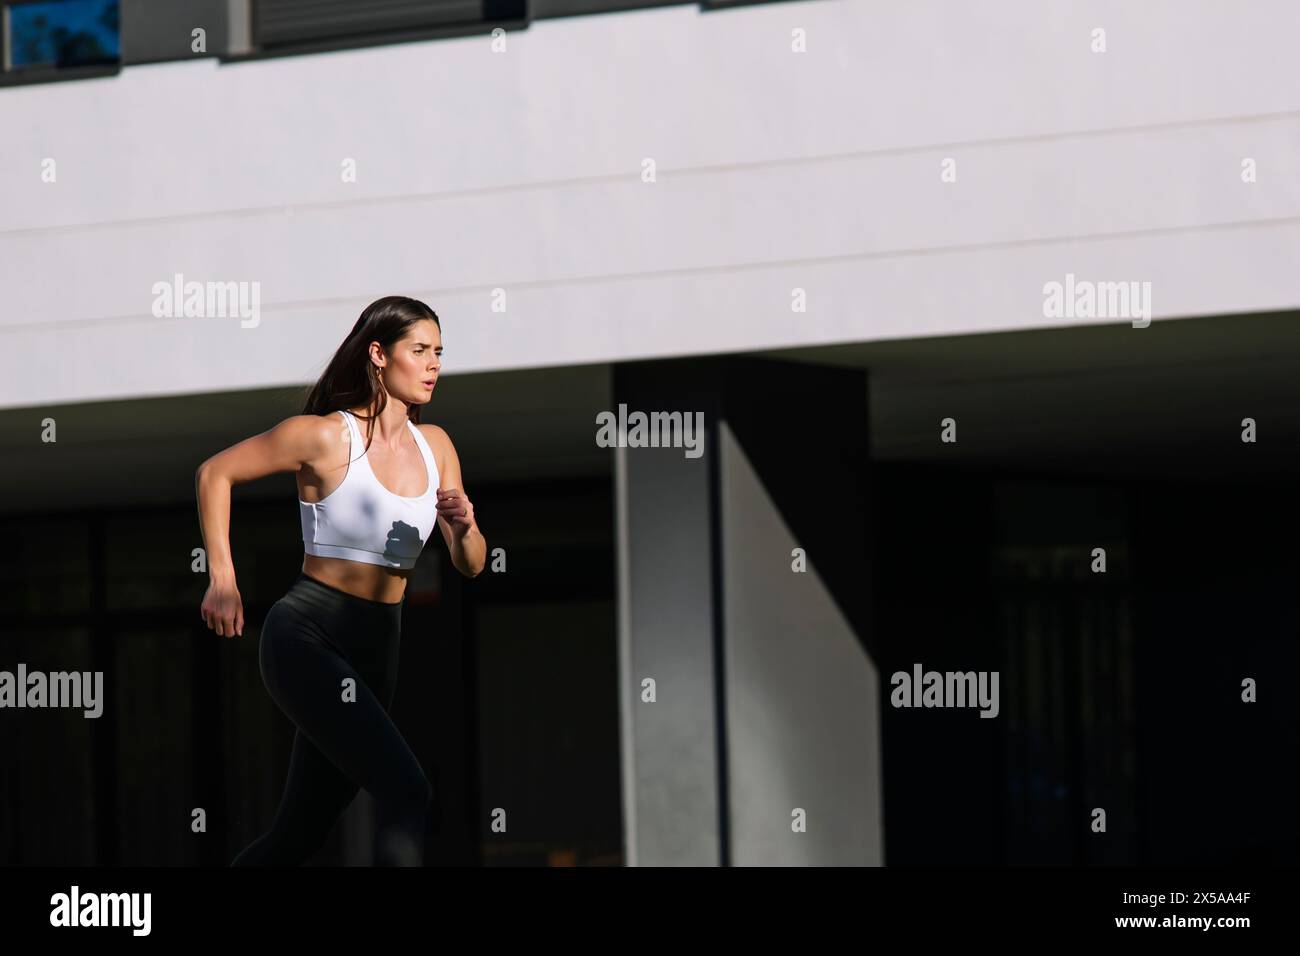 An athletic woman is captured mid-run, sporting a white sports bra and black leggings, showcasing an active lifestyle amidst an urban backdrop Stock Photo